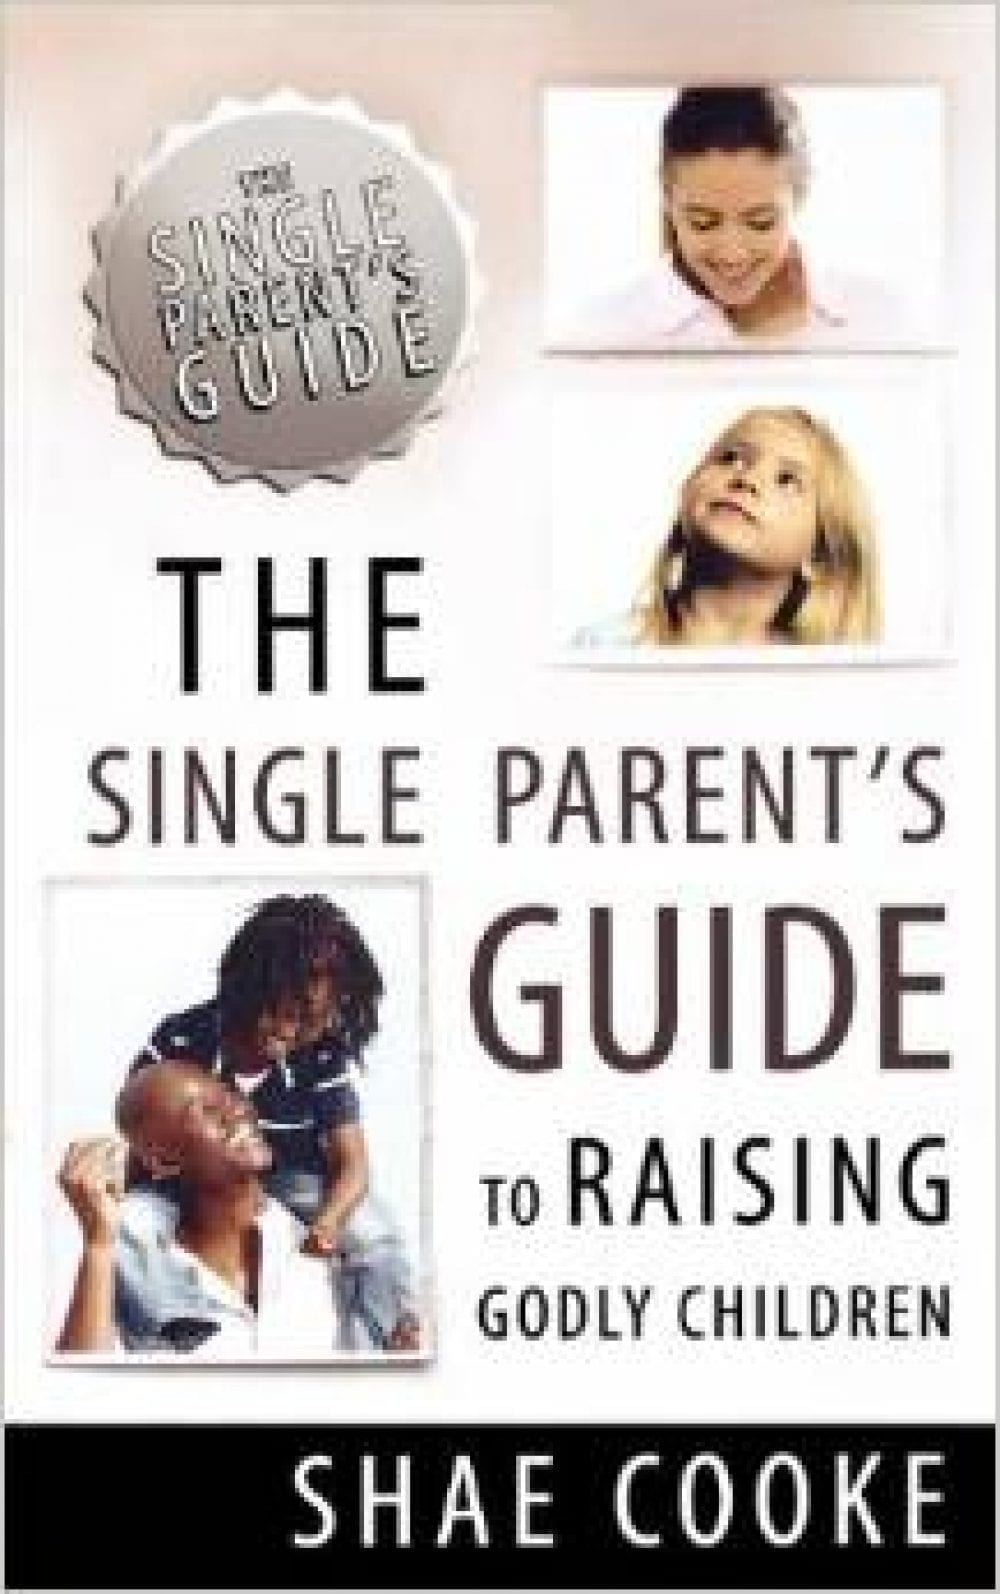 The Single Parent’s Guide to Raising Godly Children